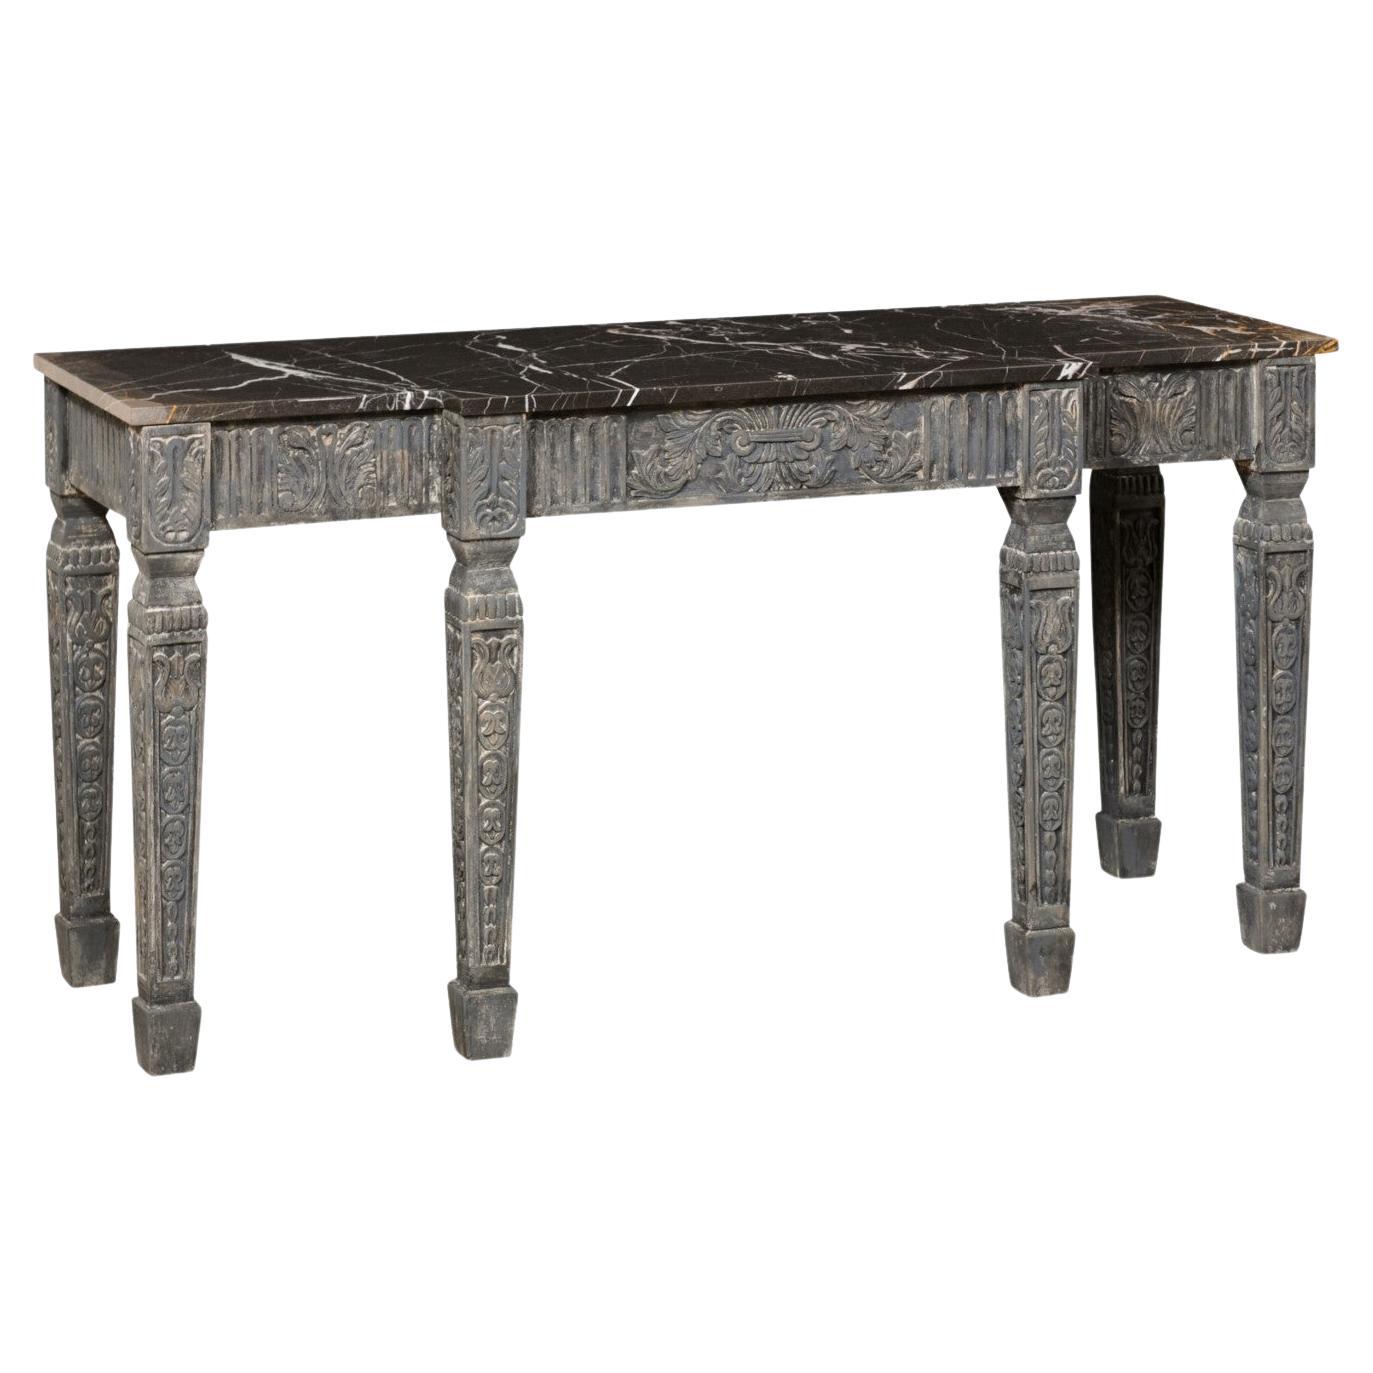 French Ornately-Carved Console Table W/Marble Top & Shallow Breakfront Design For Sale